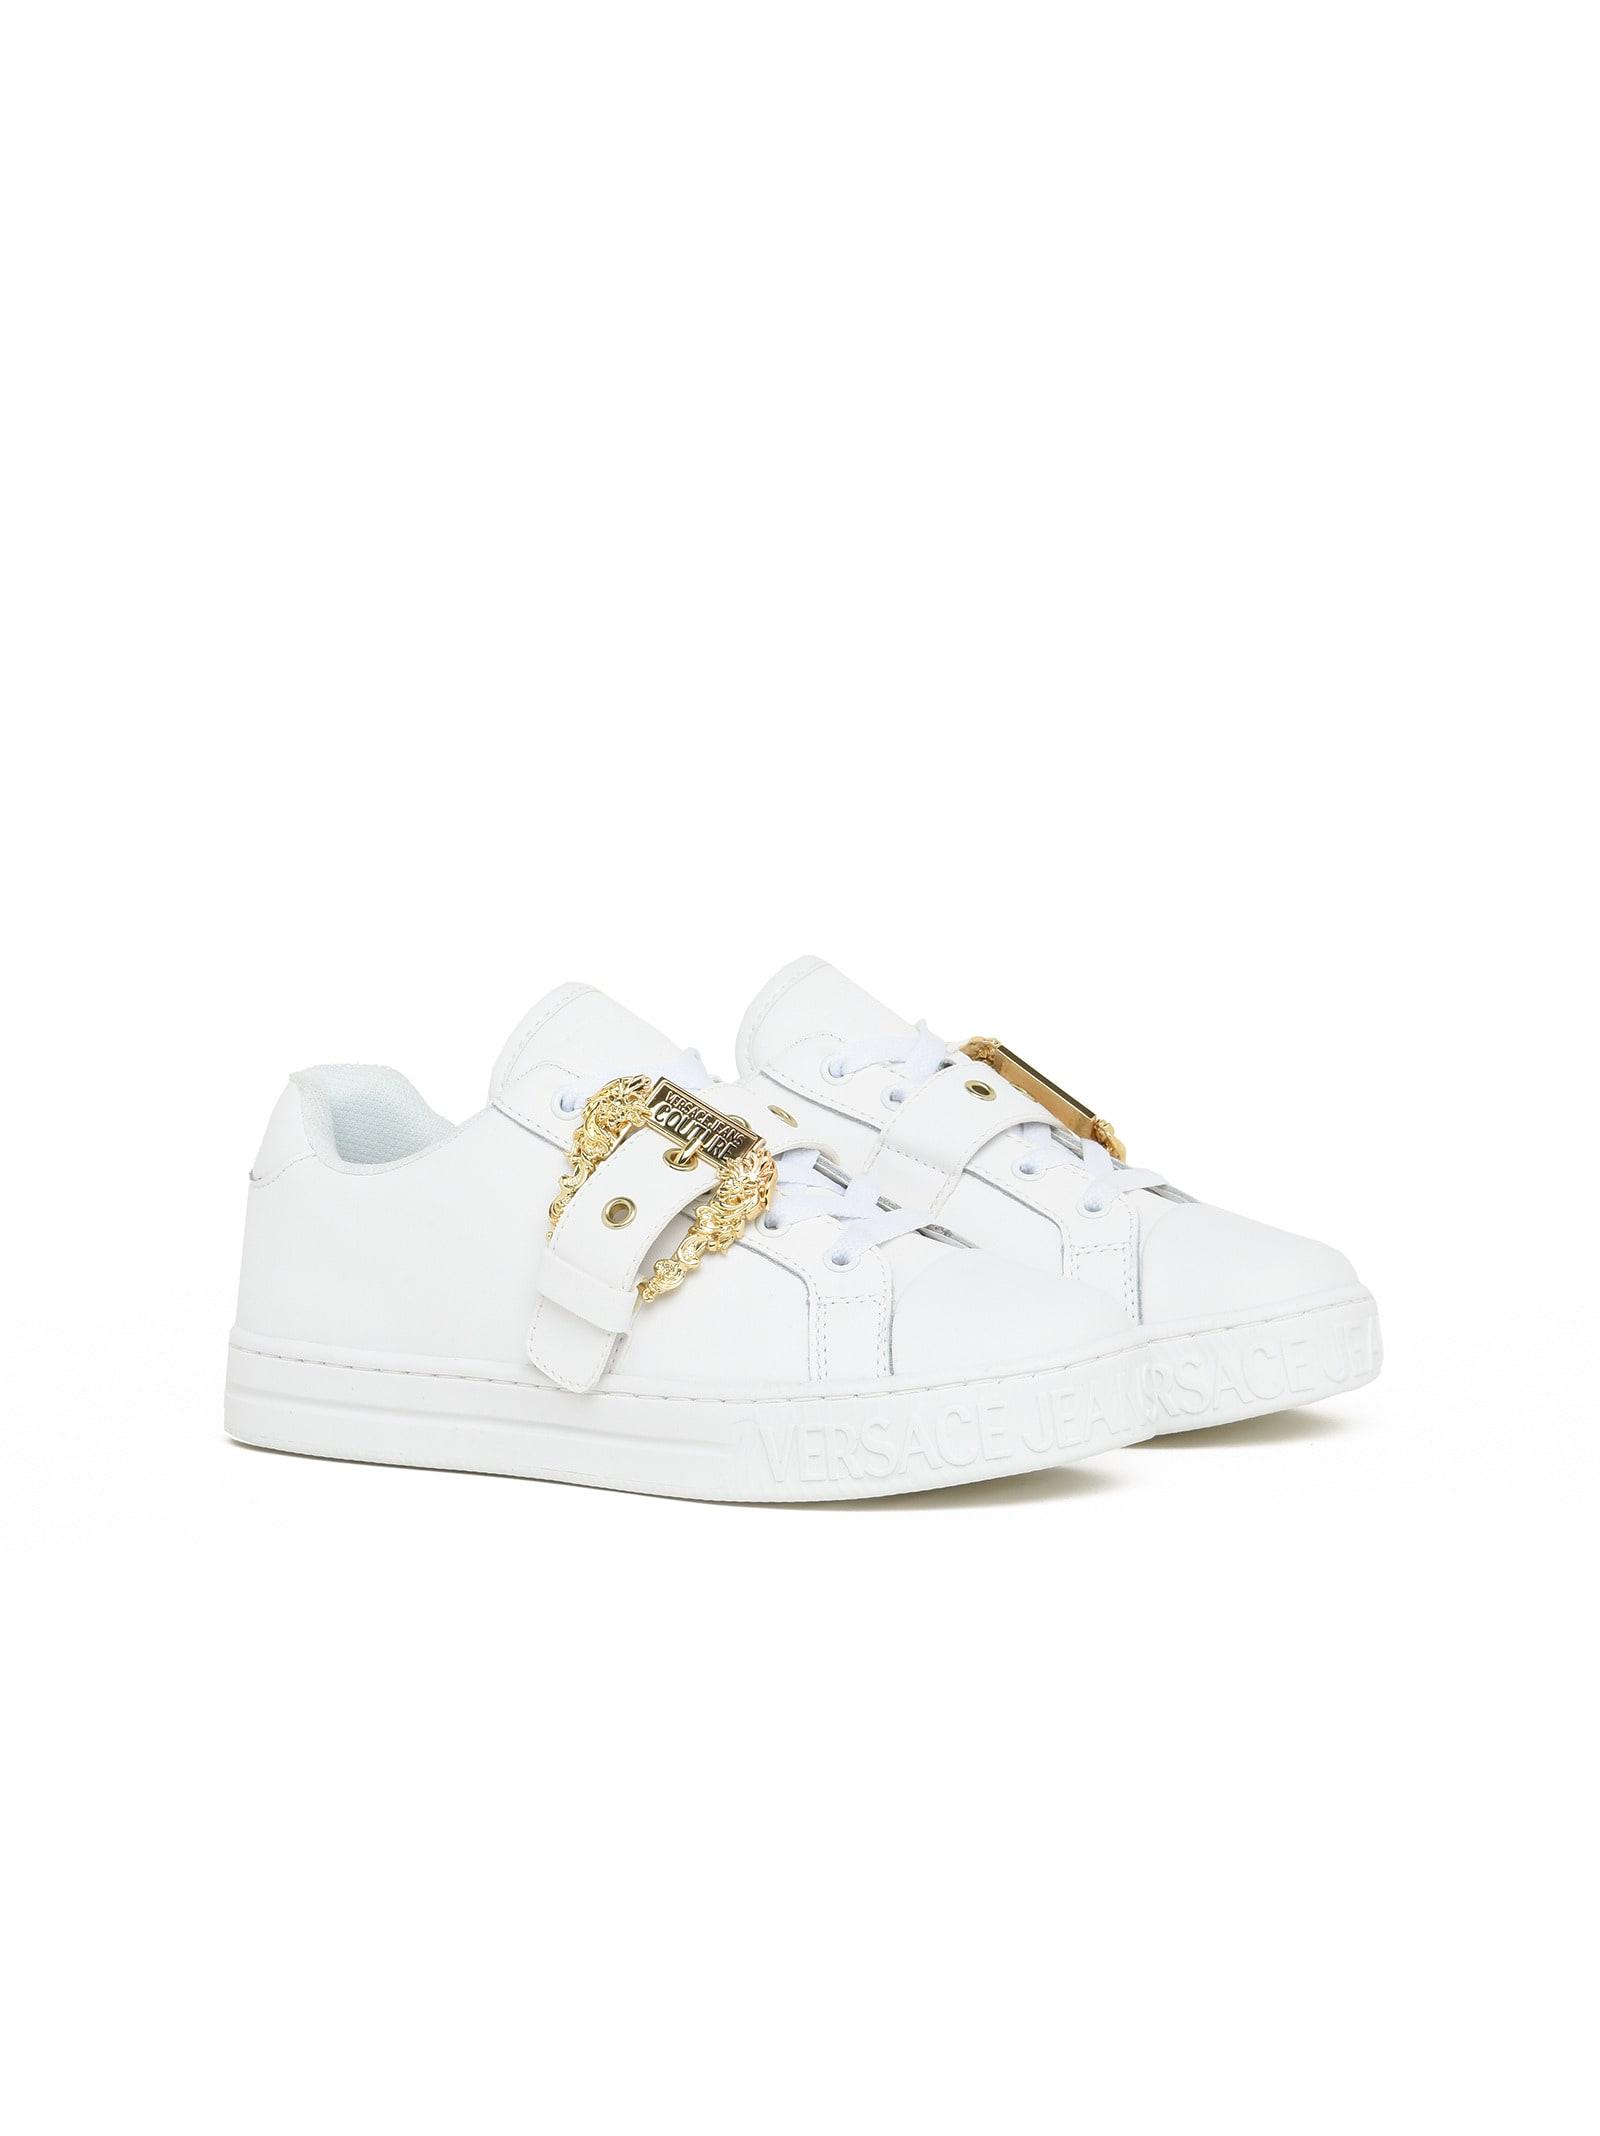 Versace Jeans Couture Jeans Couture Low-top Leather Sneakers With Buckle  Detail in White | Lyst